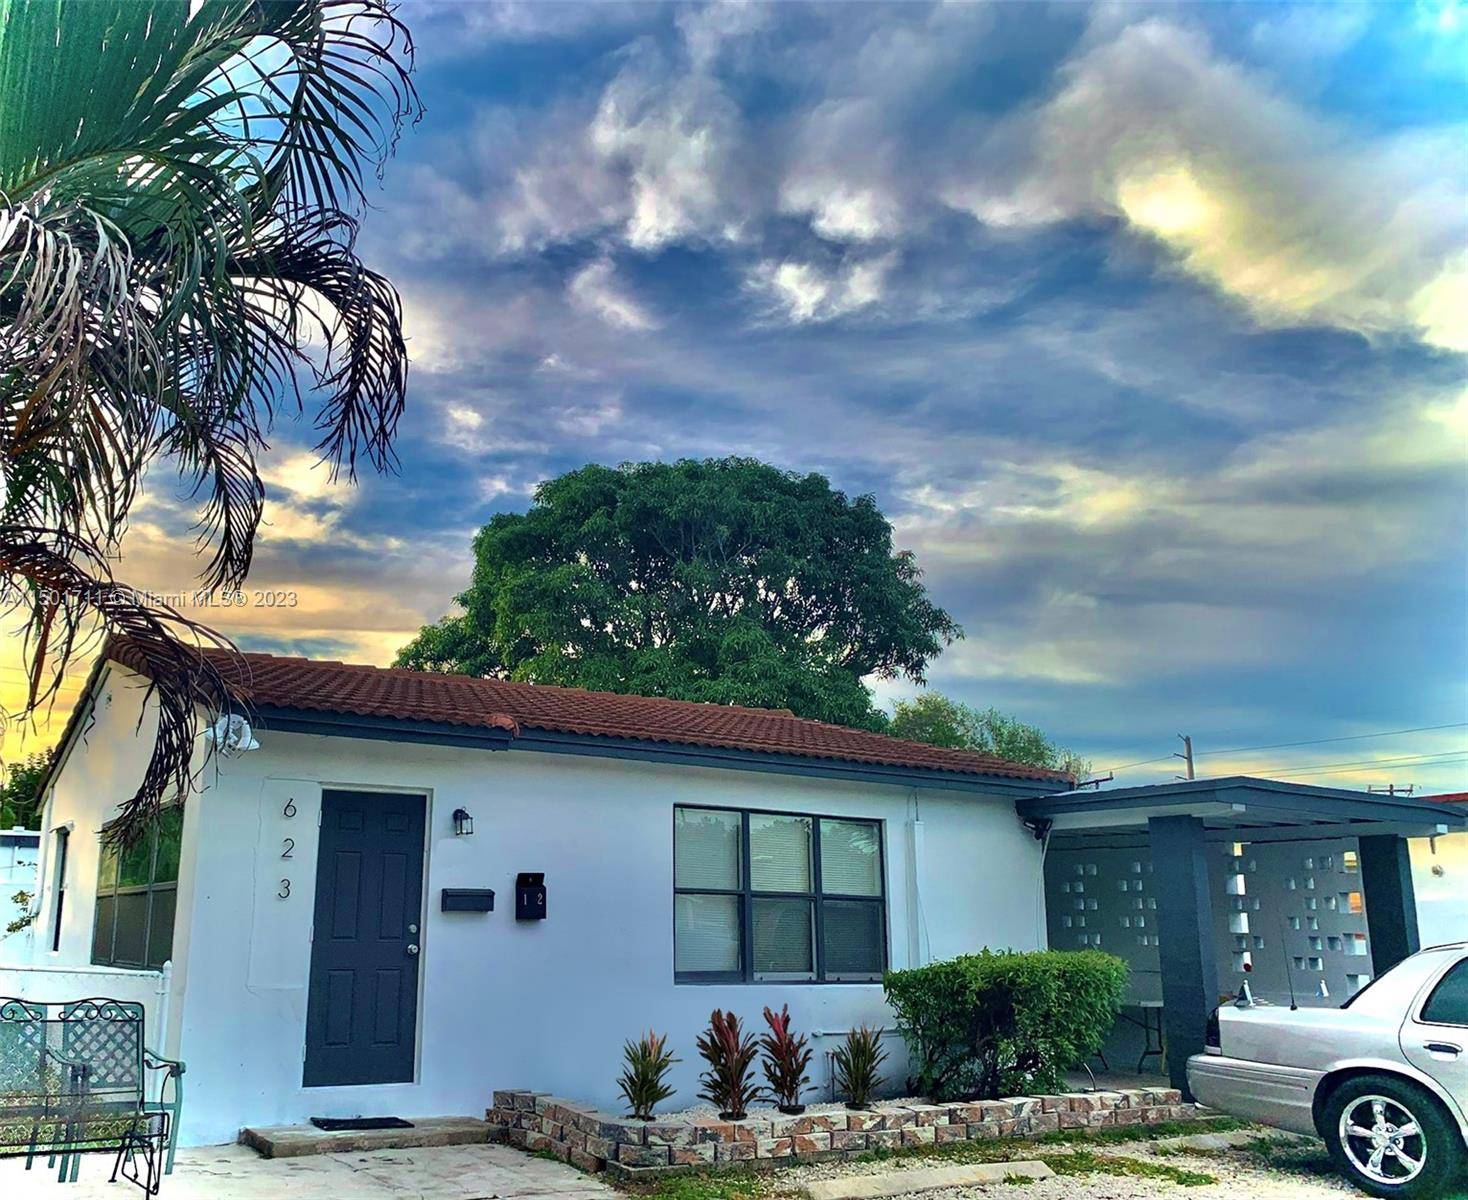 3PLEX COMP 835K 819 NW 3rd Ave 1 3, Ft Lauderdale 33311 RARE FIND Legal Triplex east of I 95 in HOT area !